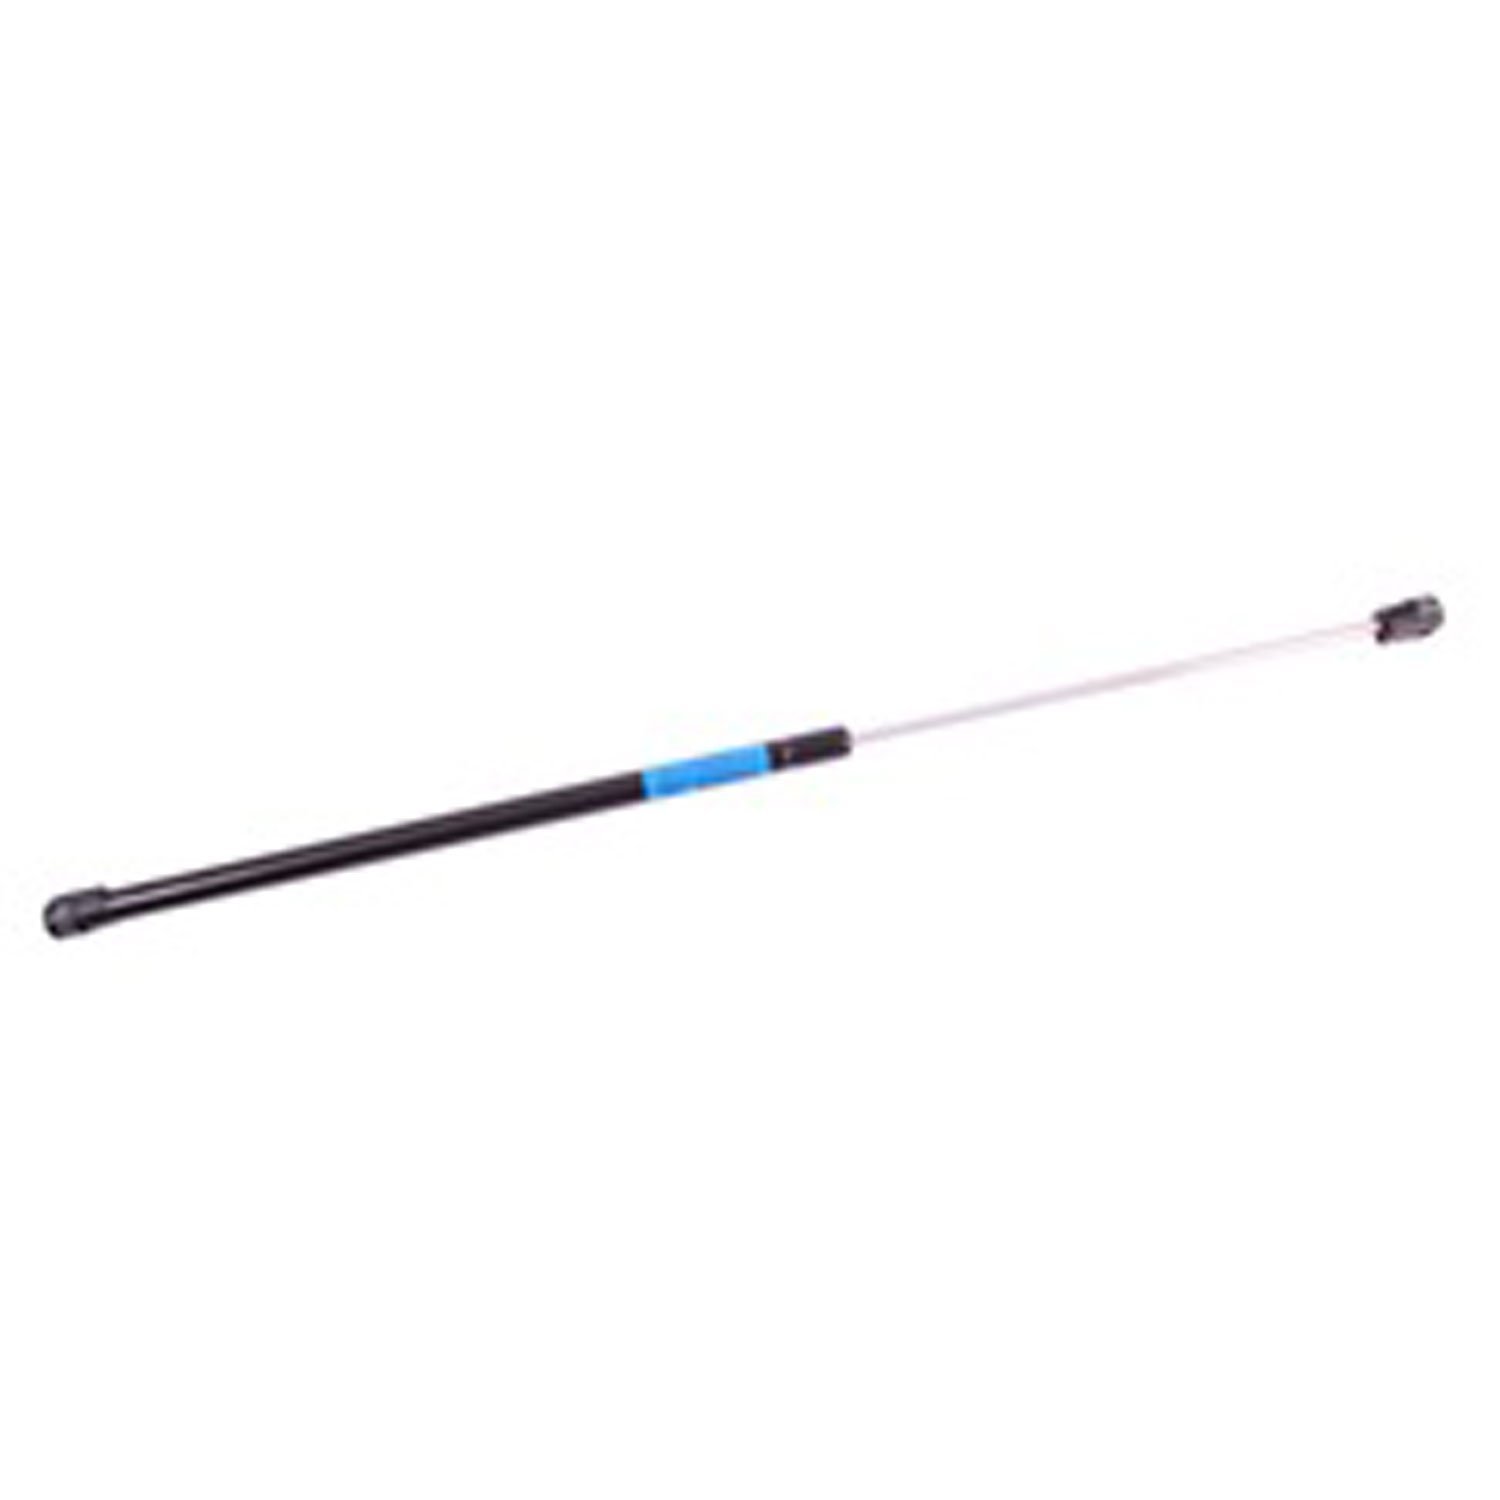 This gas strut from Omix-ADA supports the hardtop